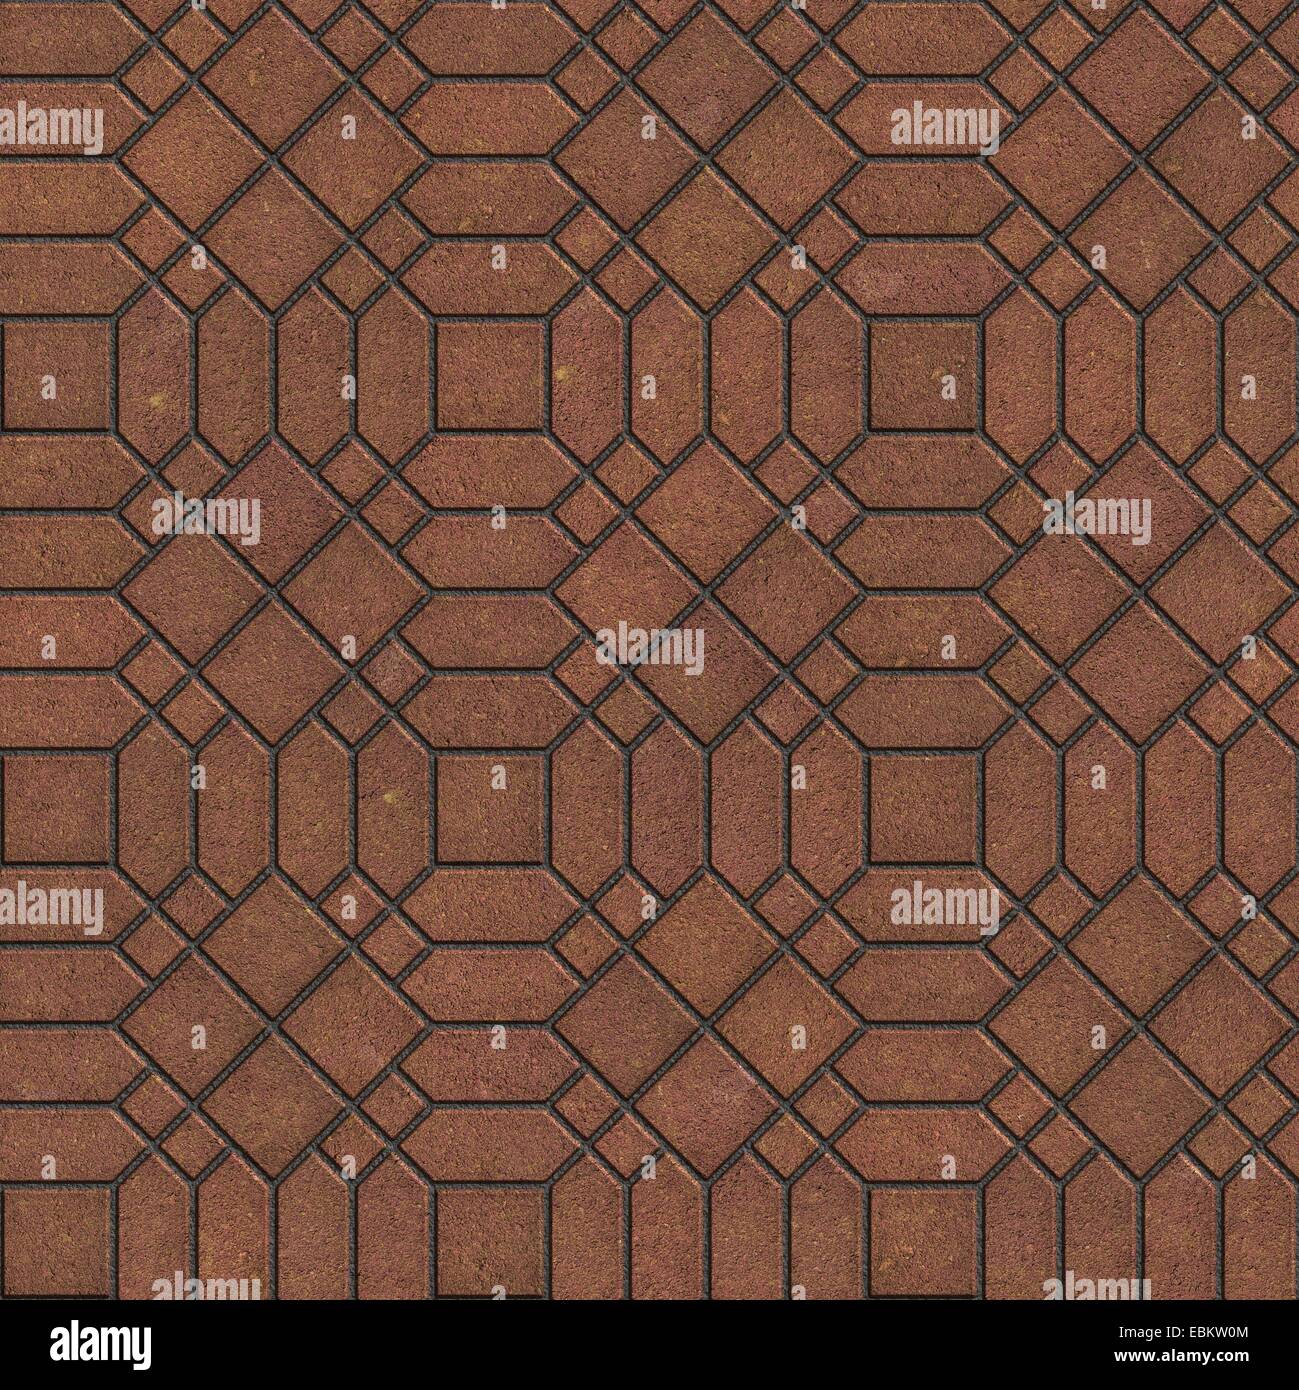 Brown Pavement with a Complicated Pattern of Different Small Elements. Seamless Tileable Texture. Stock Photo